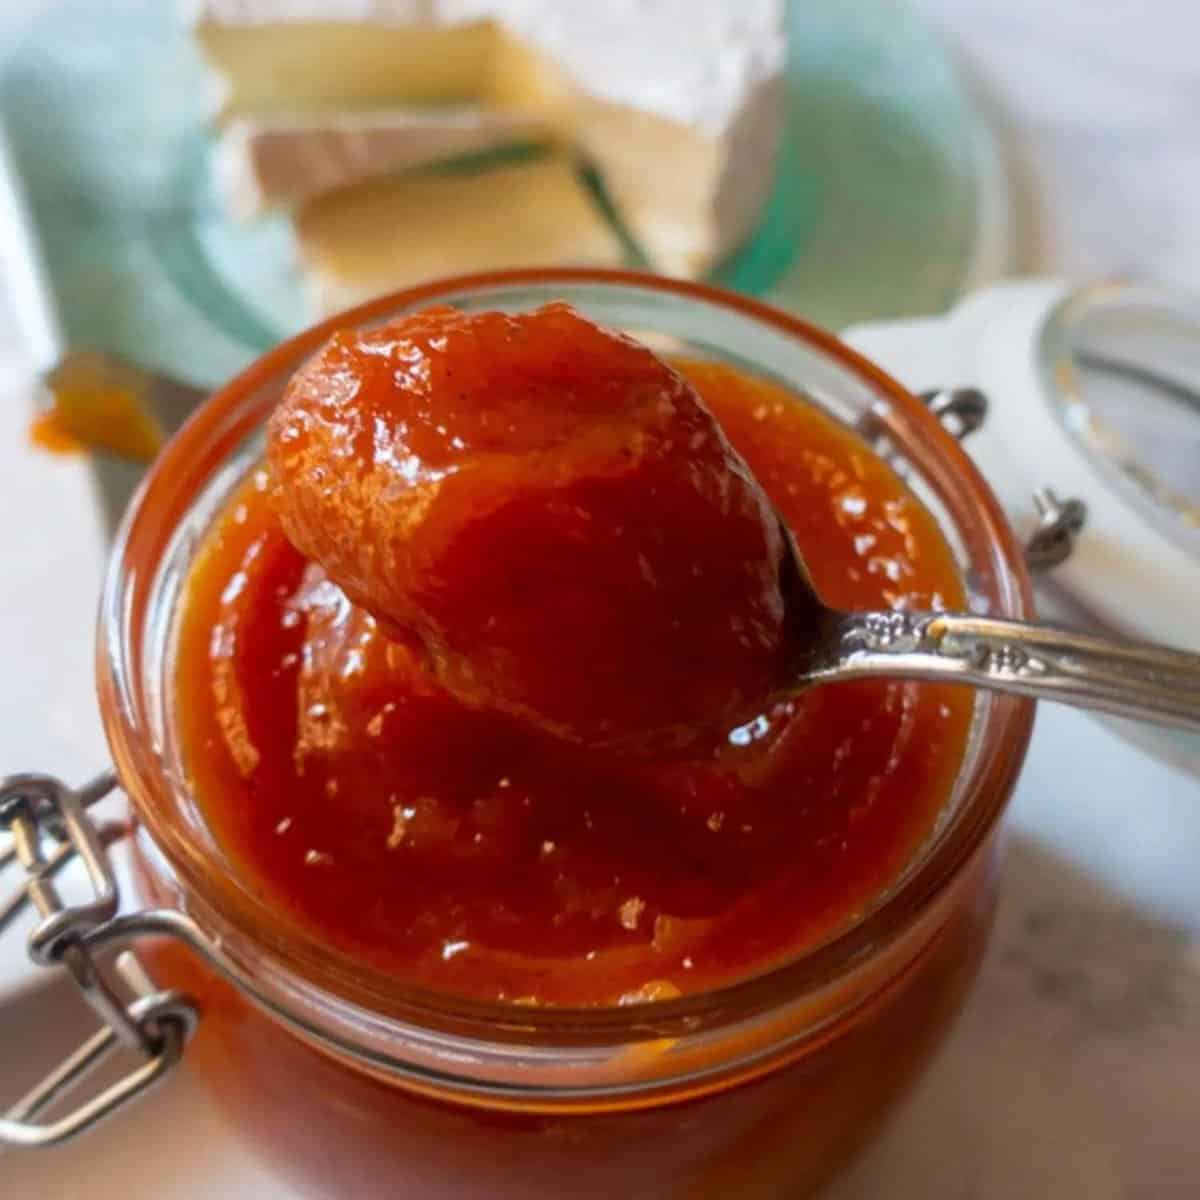 Five Corners and Pawpaw Jam: A Sweet Delight